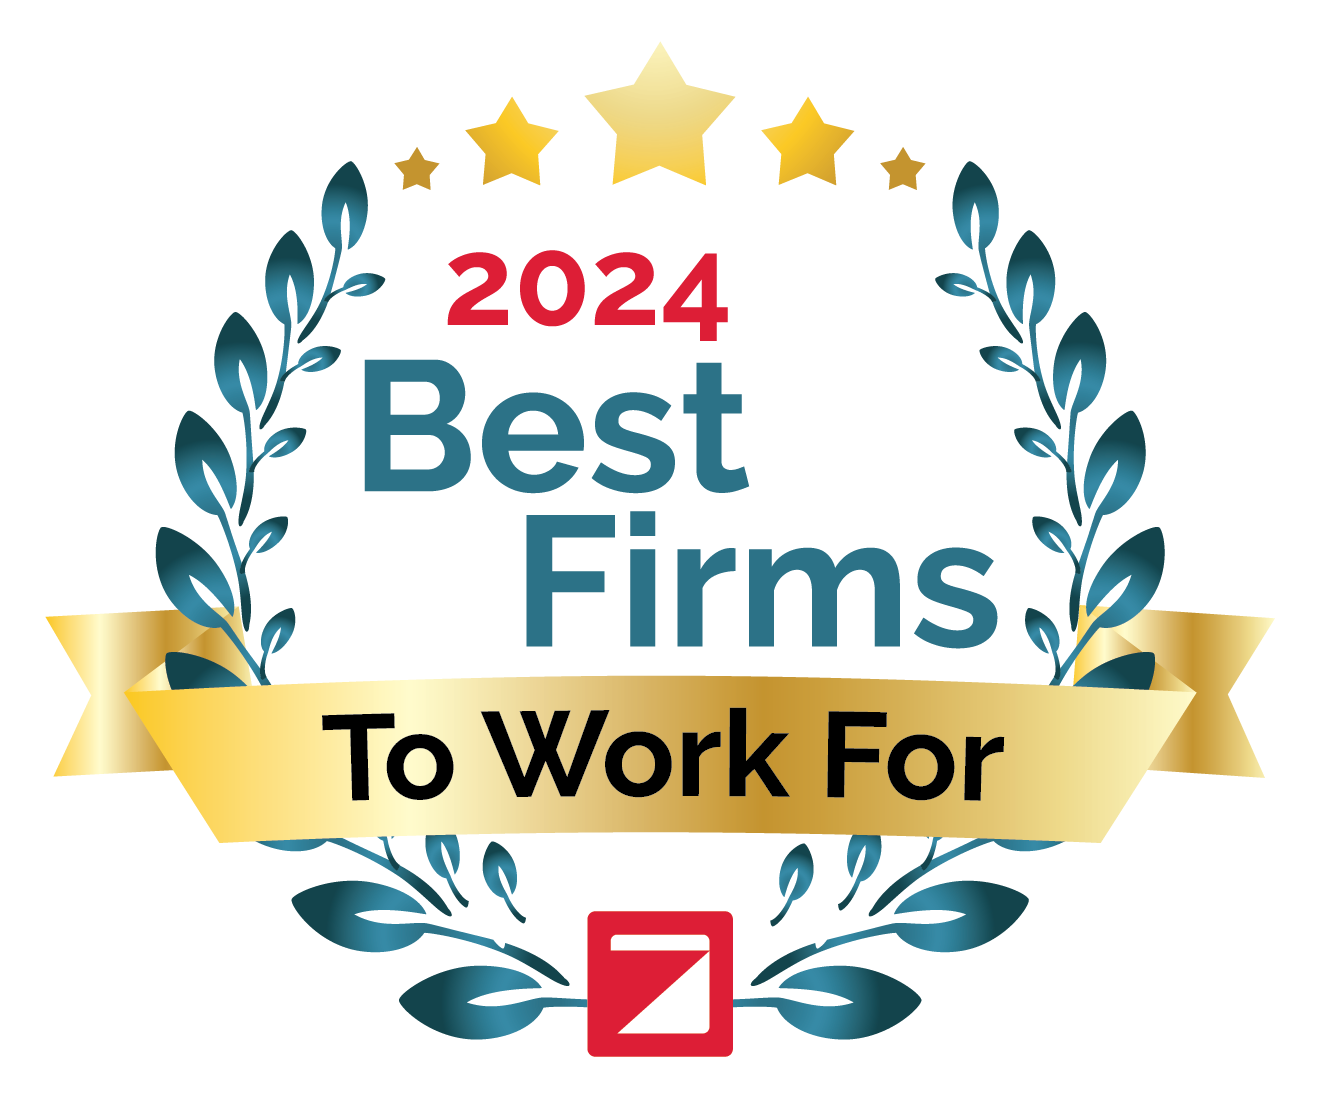 2024 Best Firms To Work For Award